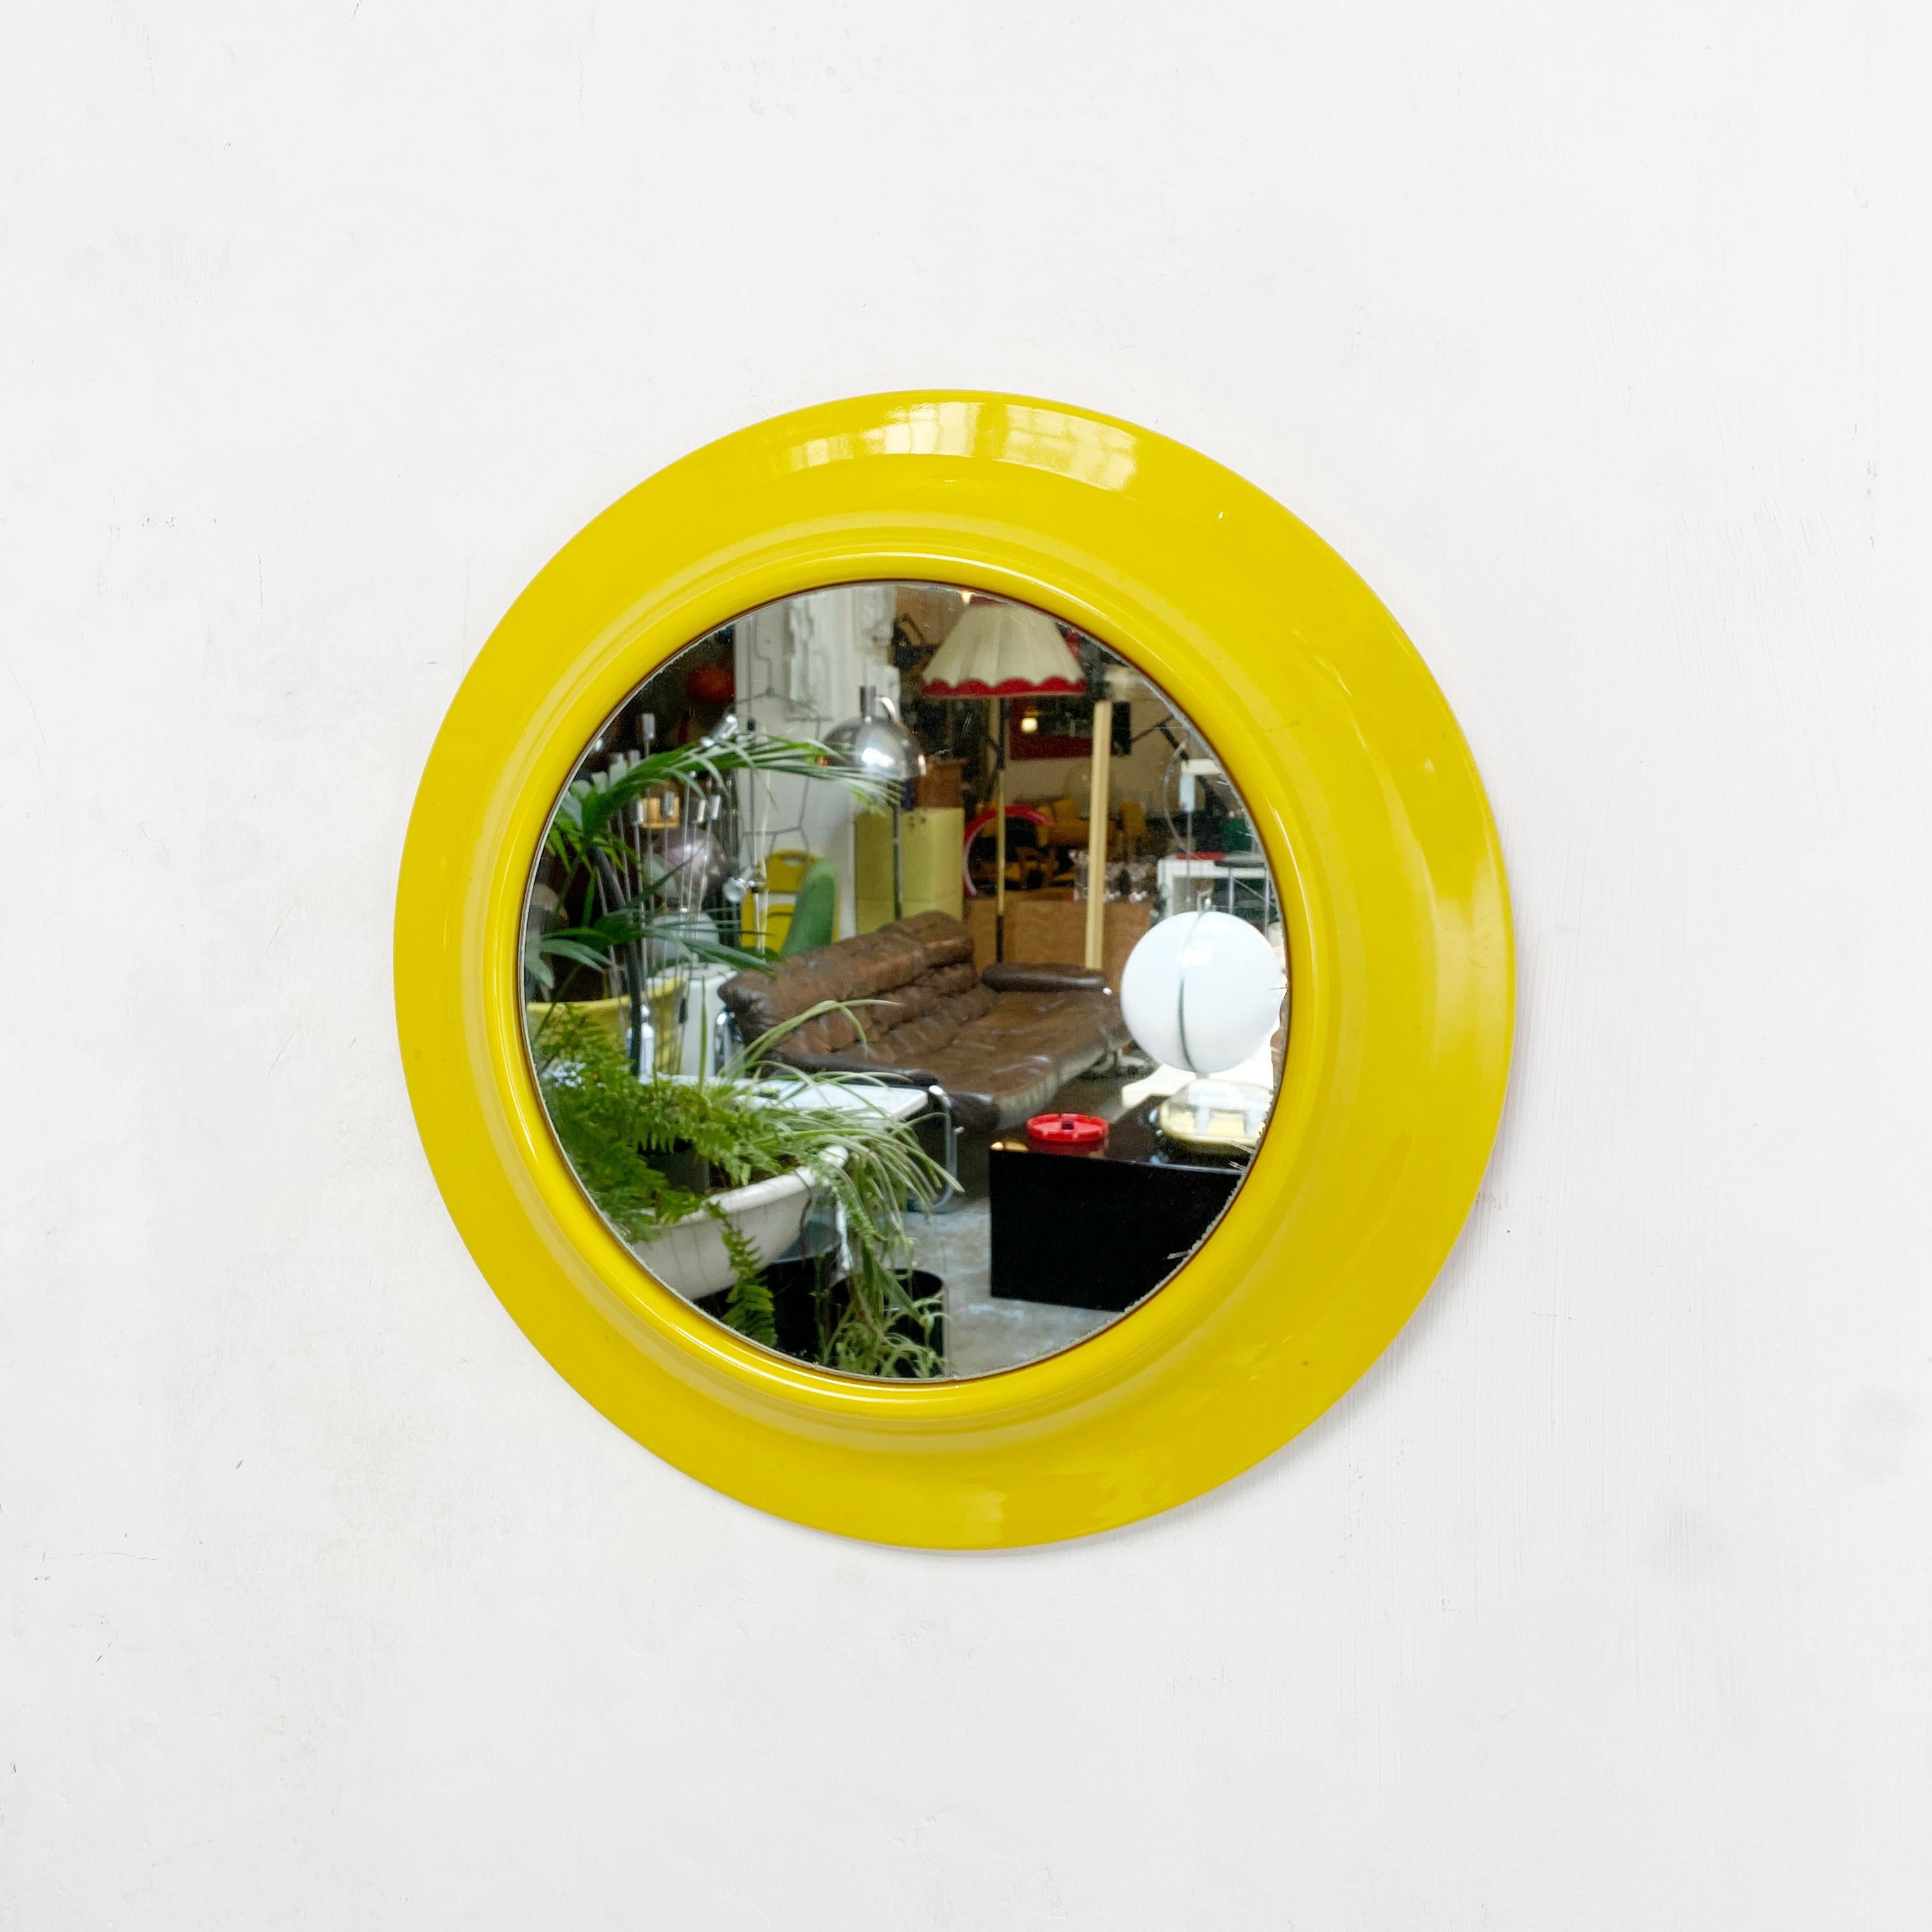 Round yellow plastic mirror, 1980s
Small size mirror with round yellow plastic frame. Model 080, branded Cattaneo, made in Italy.

Good condition, evident signs on the mirror.

Measures in cm 30 x 6.